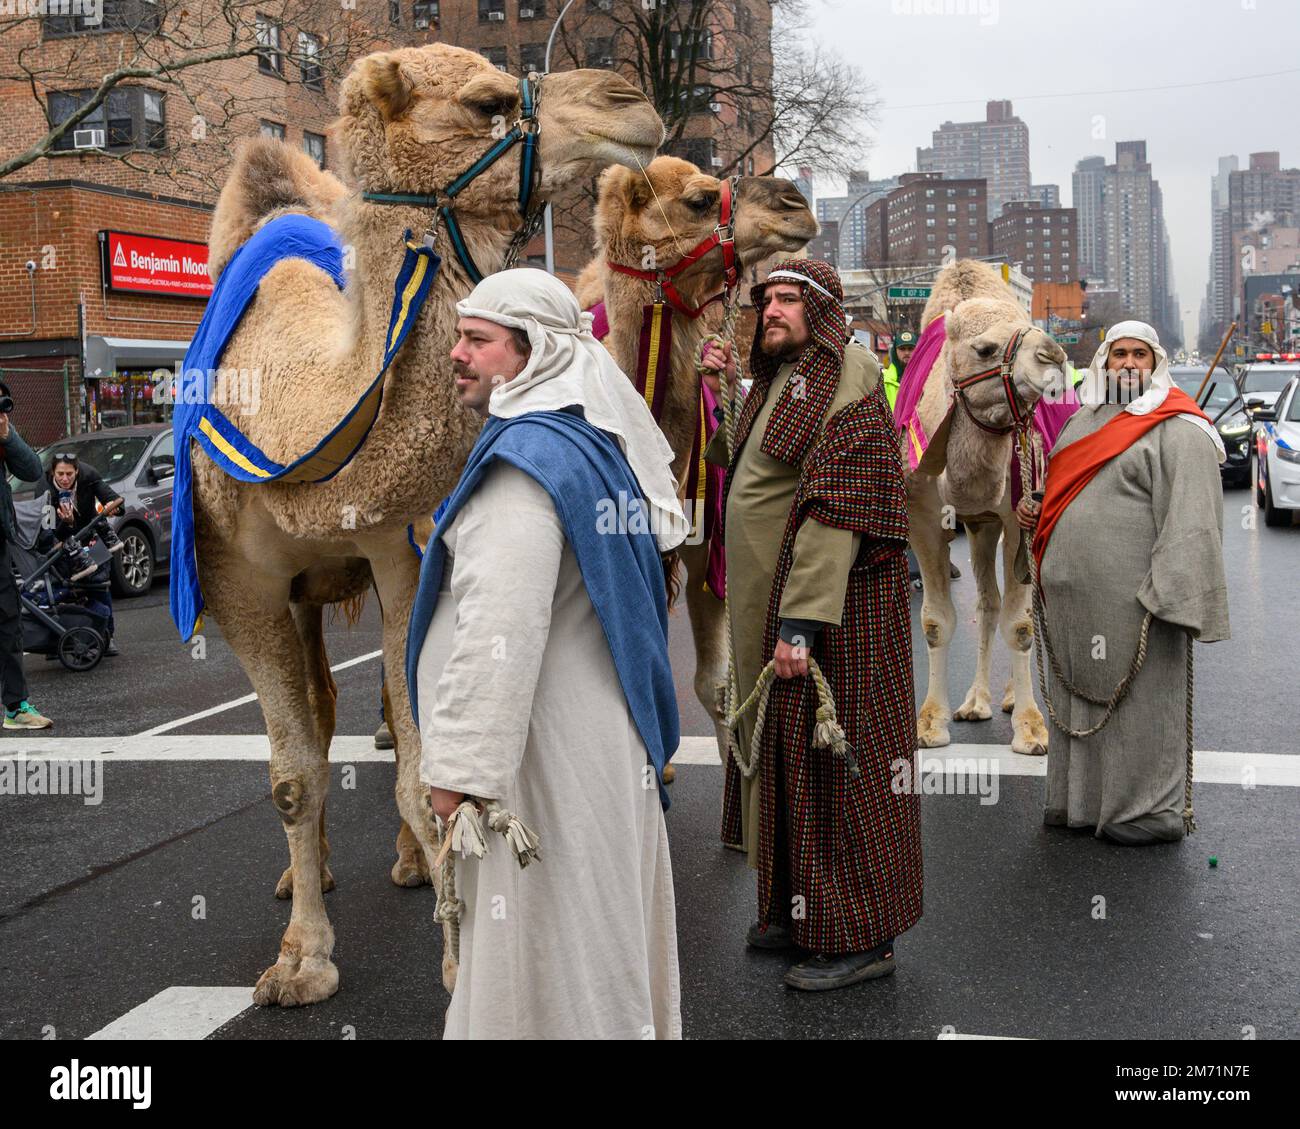 New York, USA. 6th Jan, 2023. Participants lead the camels of the 3 Wise Men through the streets in East Harlem during the 46th annual Three Kings Day Parade organized by El Museo del Barrio. The traditional Spanish celebration was held in person for the first time since the start of the coronavirus (COVID-19) pandemic. The theme for this year was: 'Entre Familia: Mental Health & Wellness of our Communities' focusing on the importance of mental health and wellness. Credit: Enrique Shore/Alamy Live News Stock Photo